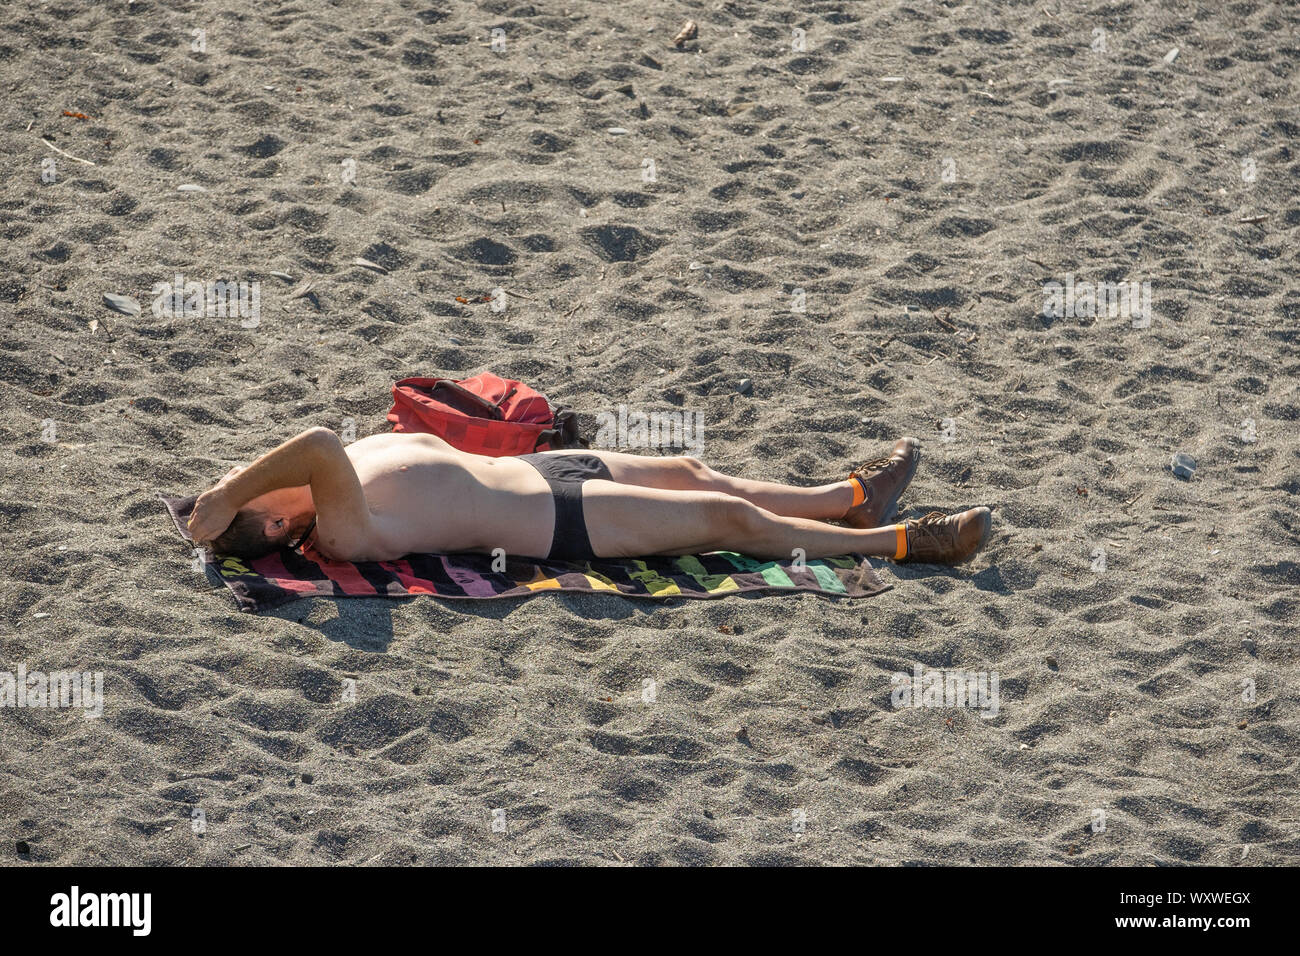 Aberystwyth Wales UK, Wednesday 18th September 2019  UK Weather: A man sunbathing on the beach,  making the most of a day of clear blue skies and warm September sunshine at the seaside in Aberystwyth on the Cardigan Bay coast, west Wales, as a high pressure system dominates the weather over the souther half of the UK. Photo credit Keith Morris / Alamy Live News Stock Photo